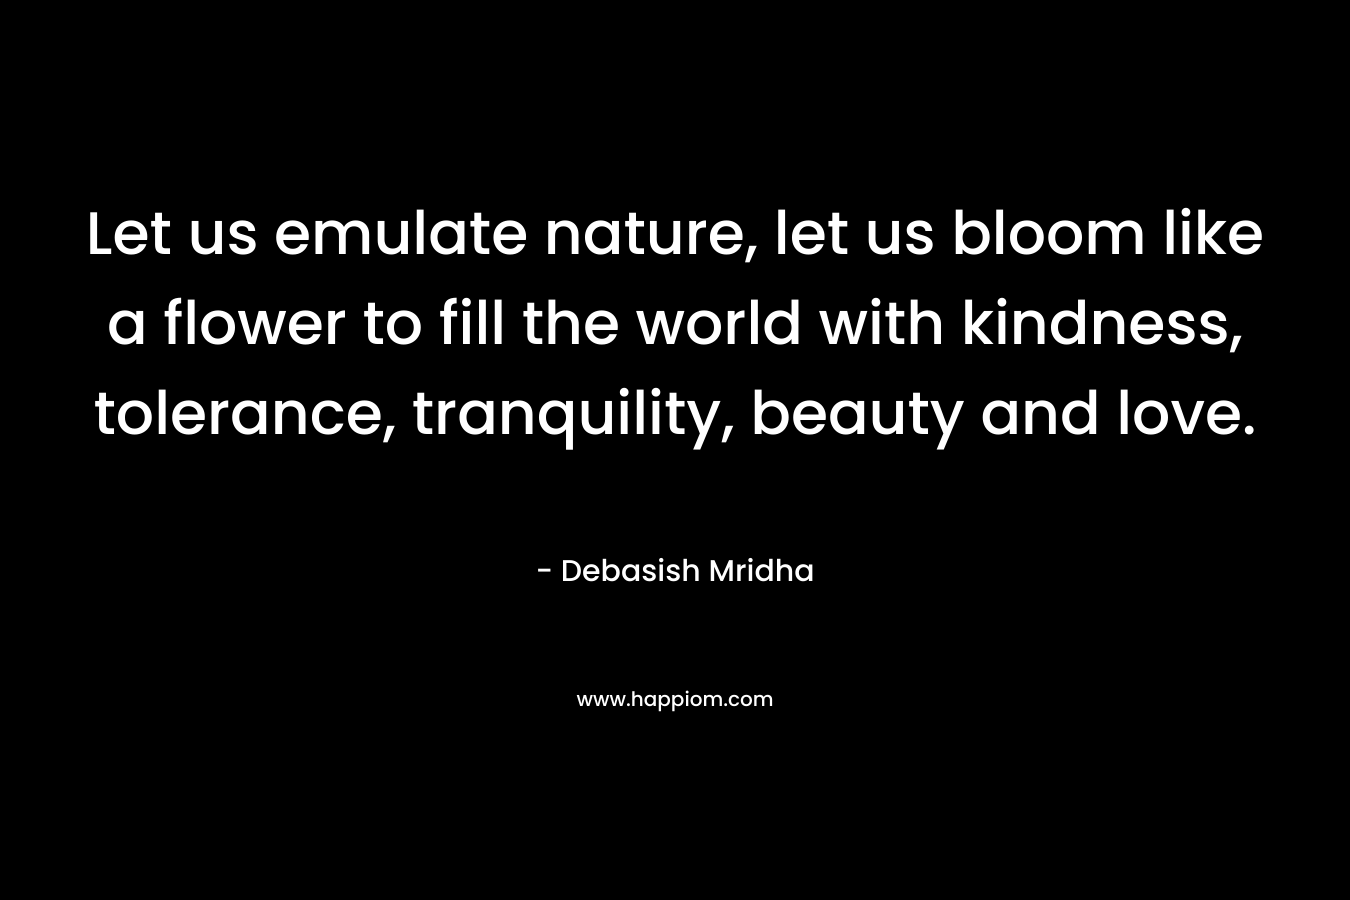 Let us emulate nature, let us bloom like a flower to fill the world with kindness, tolerance, tranquility, beauty and love.